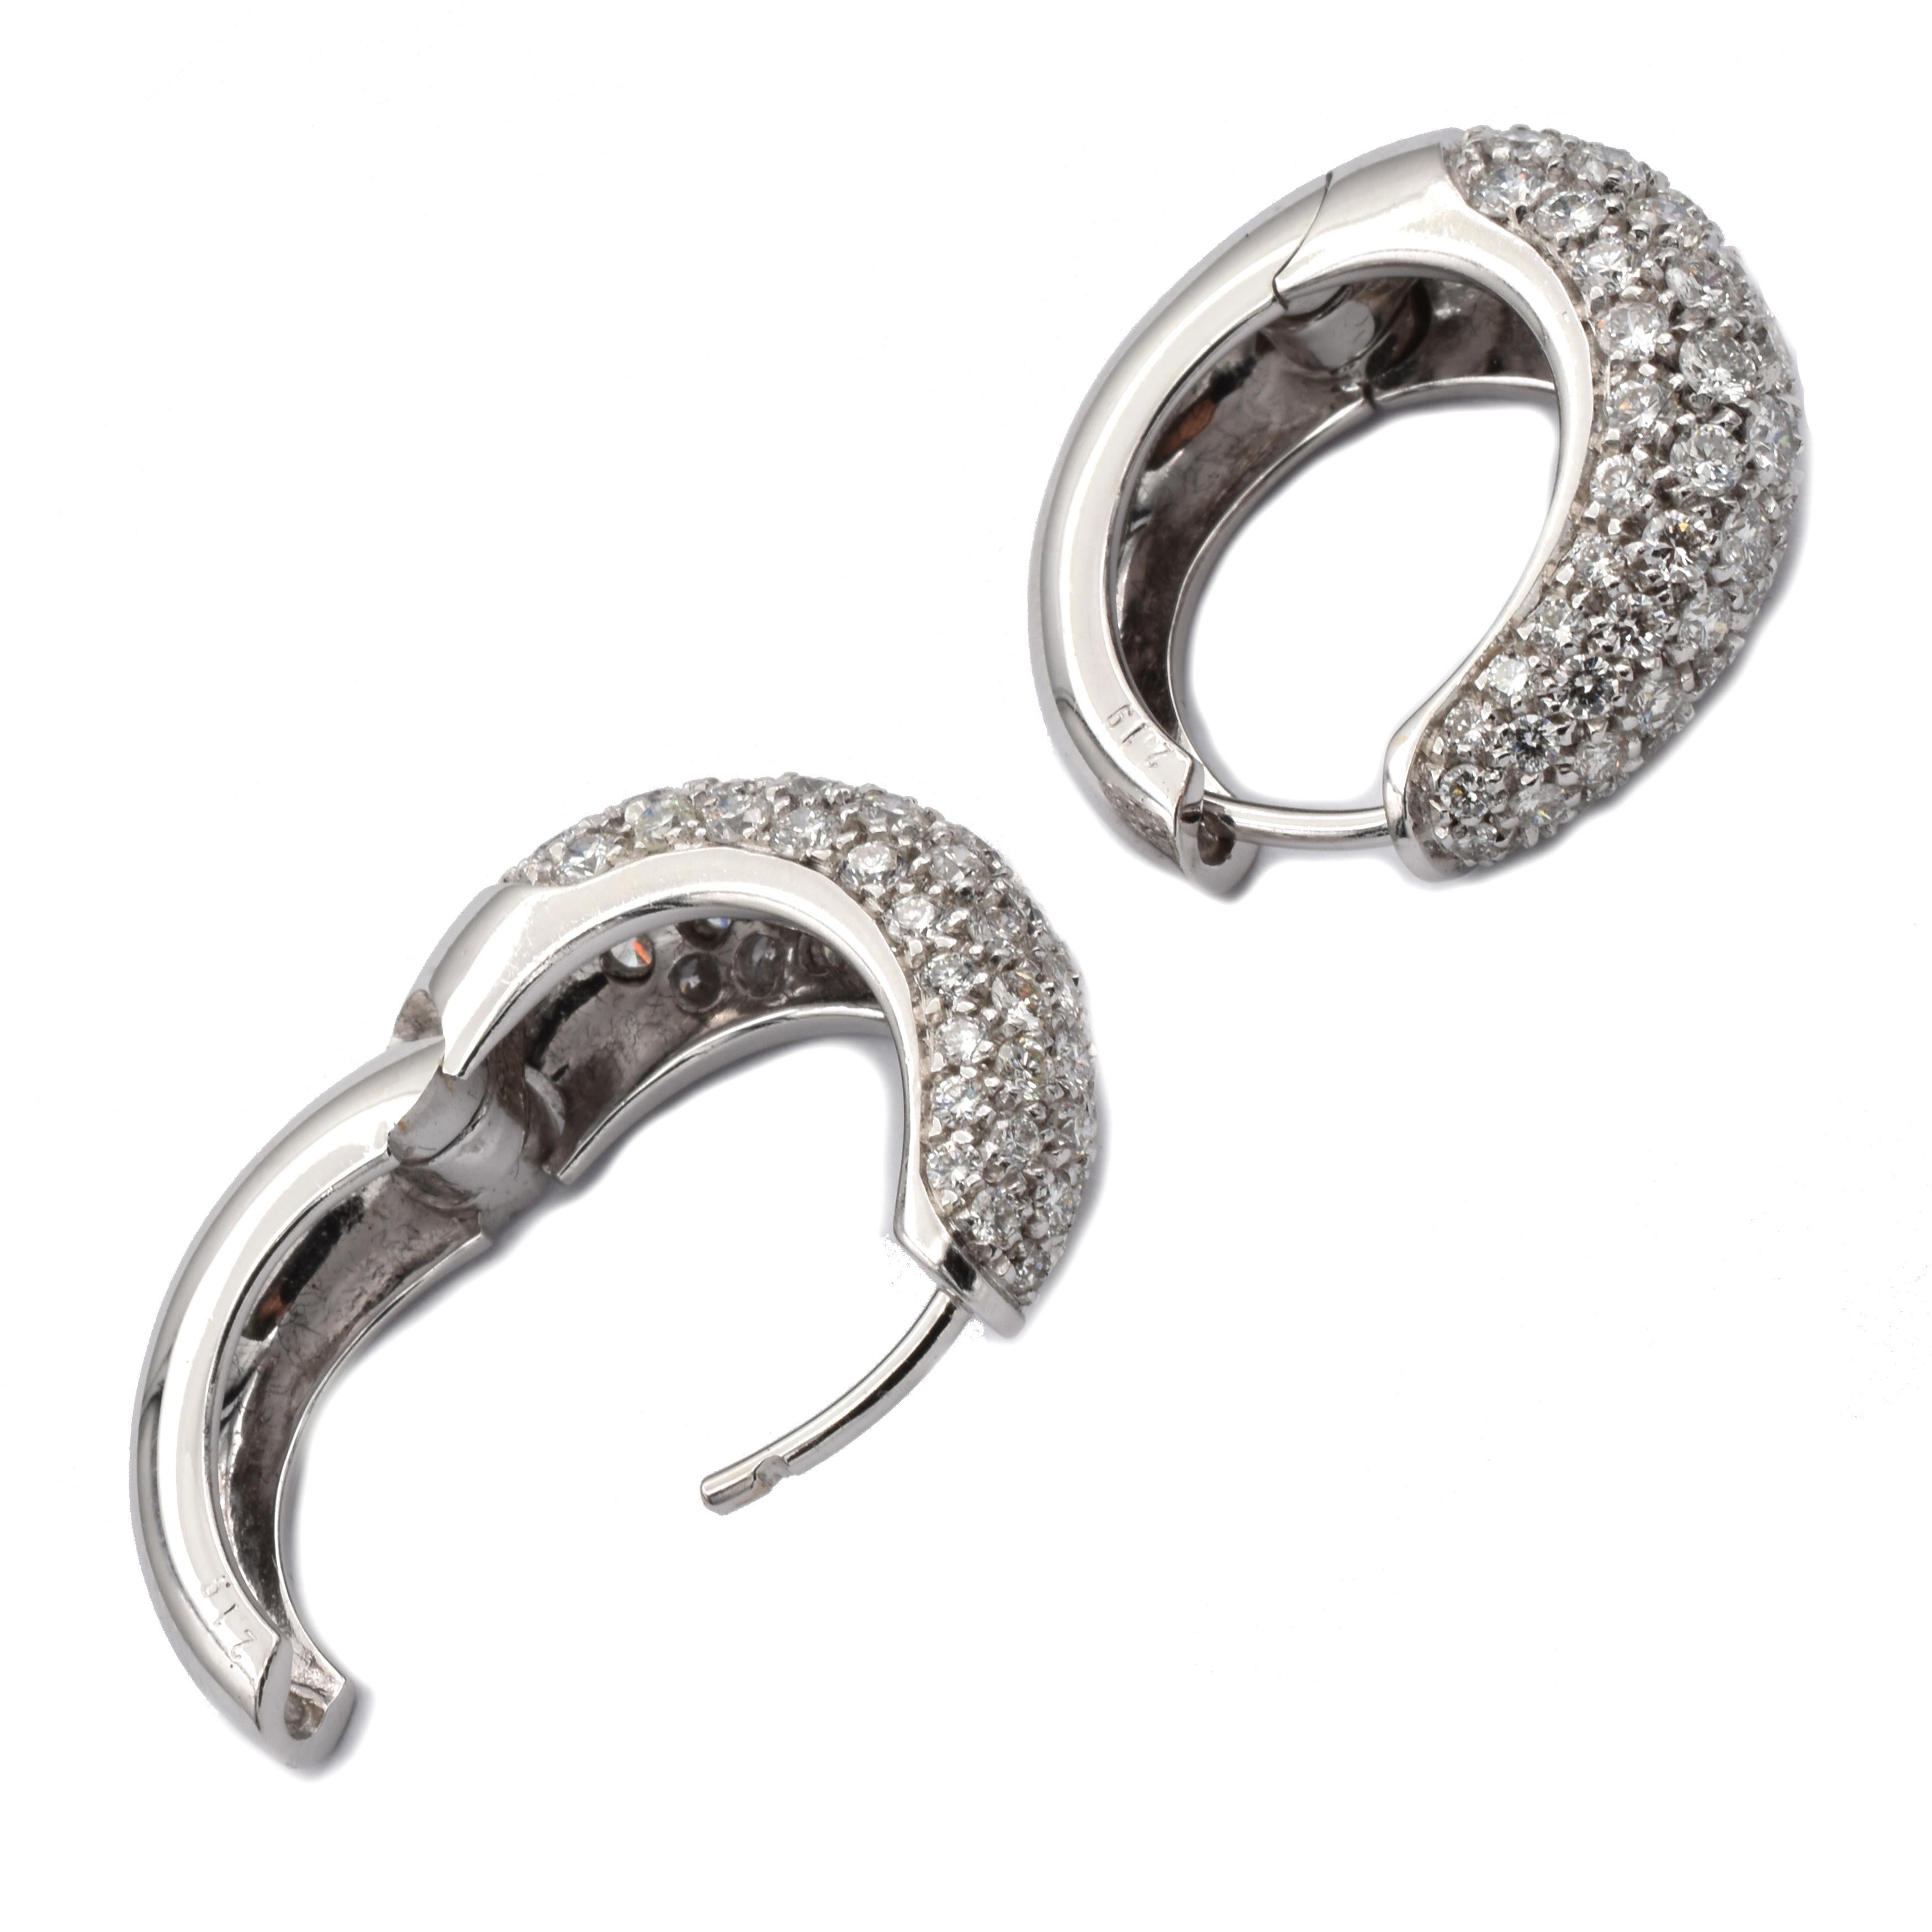 Gilberto Cassola Diamond White Gold Hoop Earrings Made in Italy In New Condition For Sale In Valenza, AL